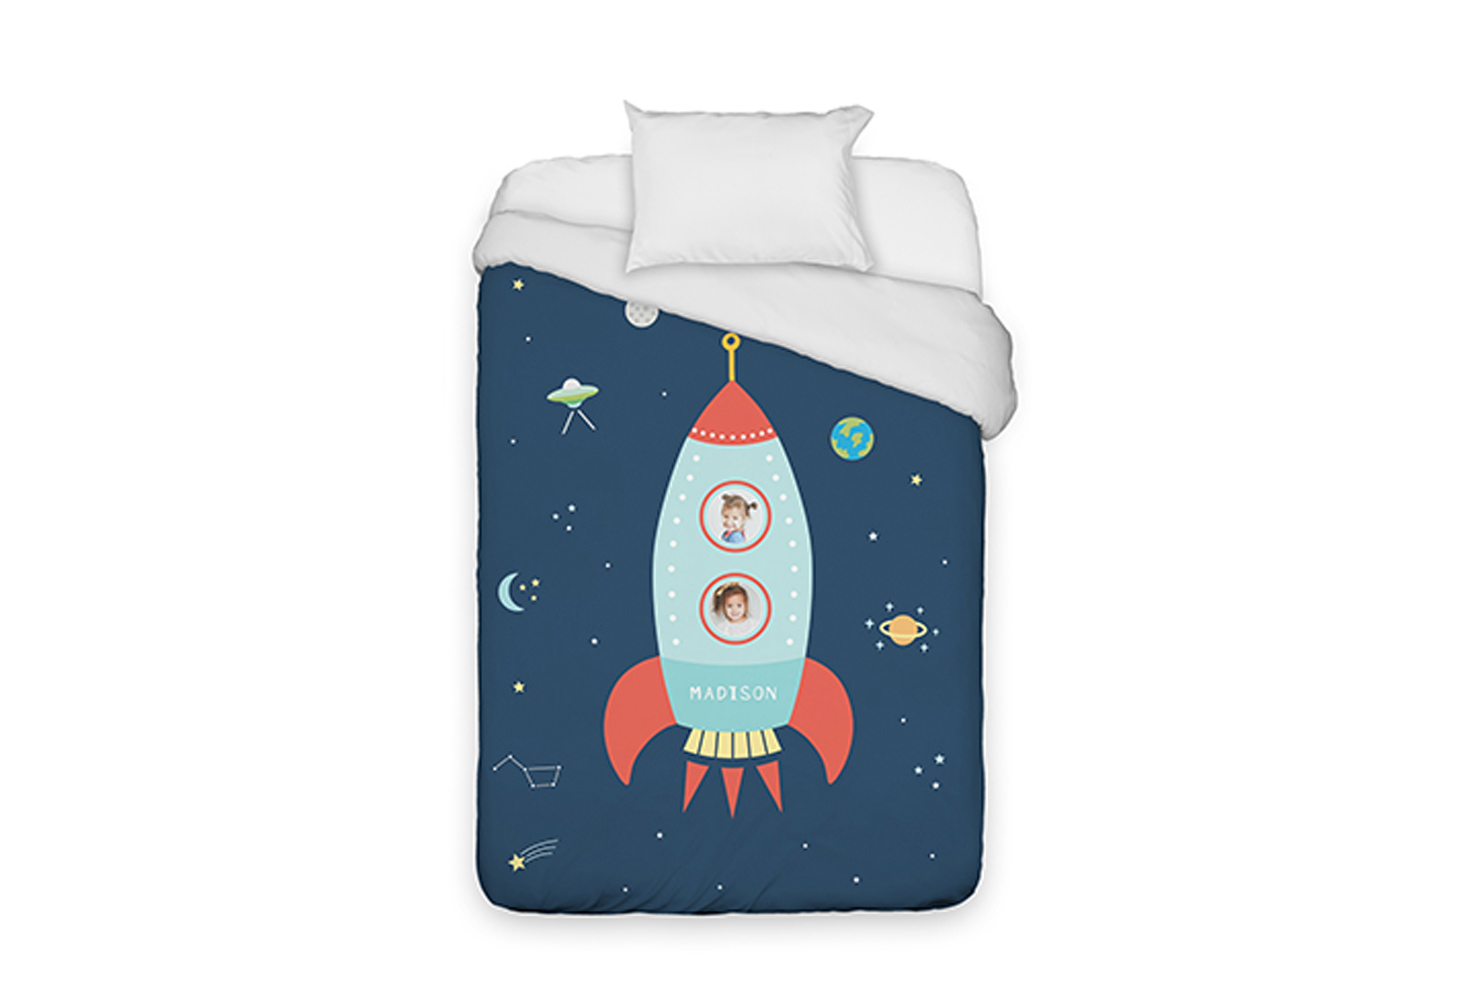 Outer space themed bedding.